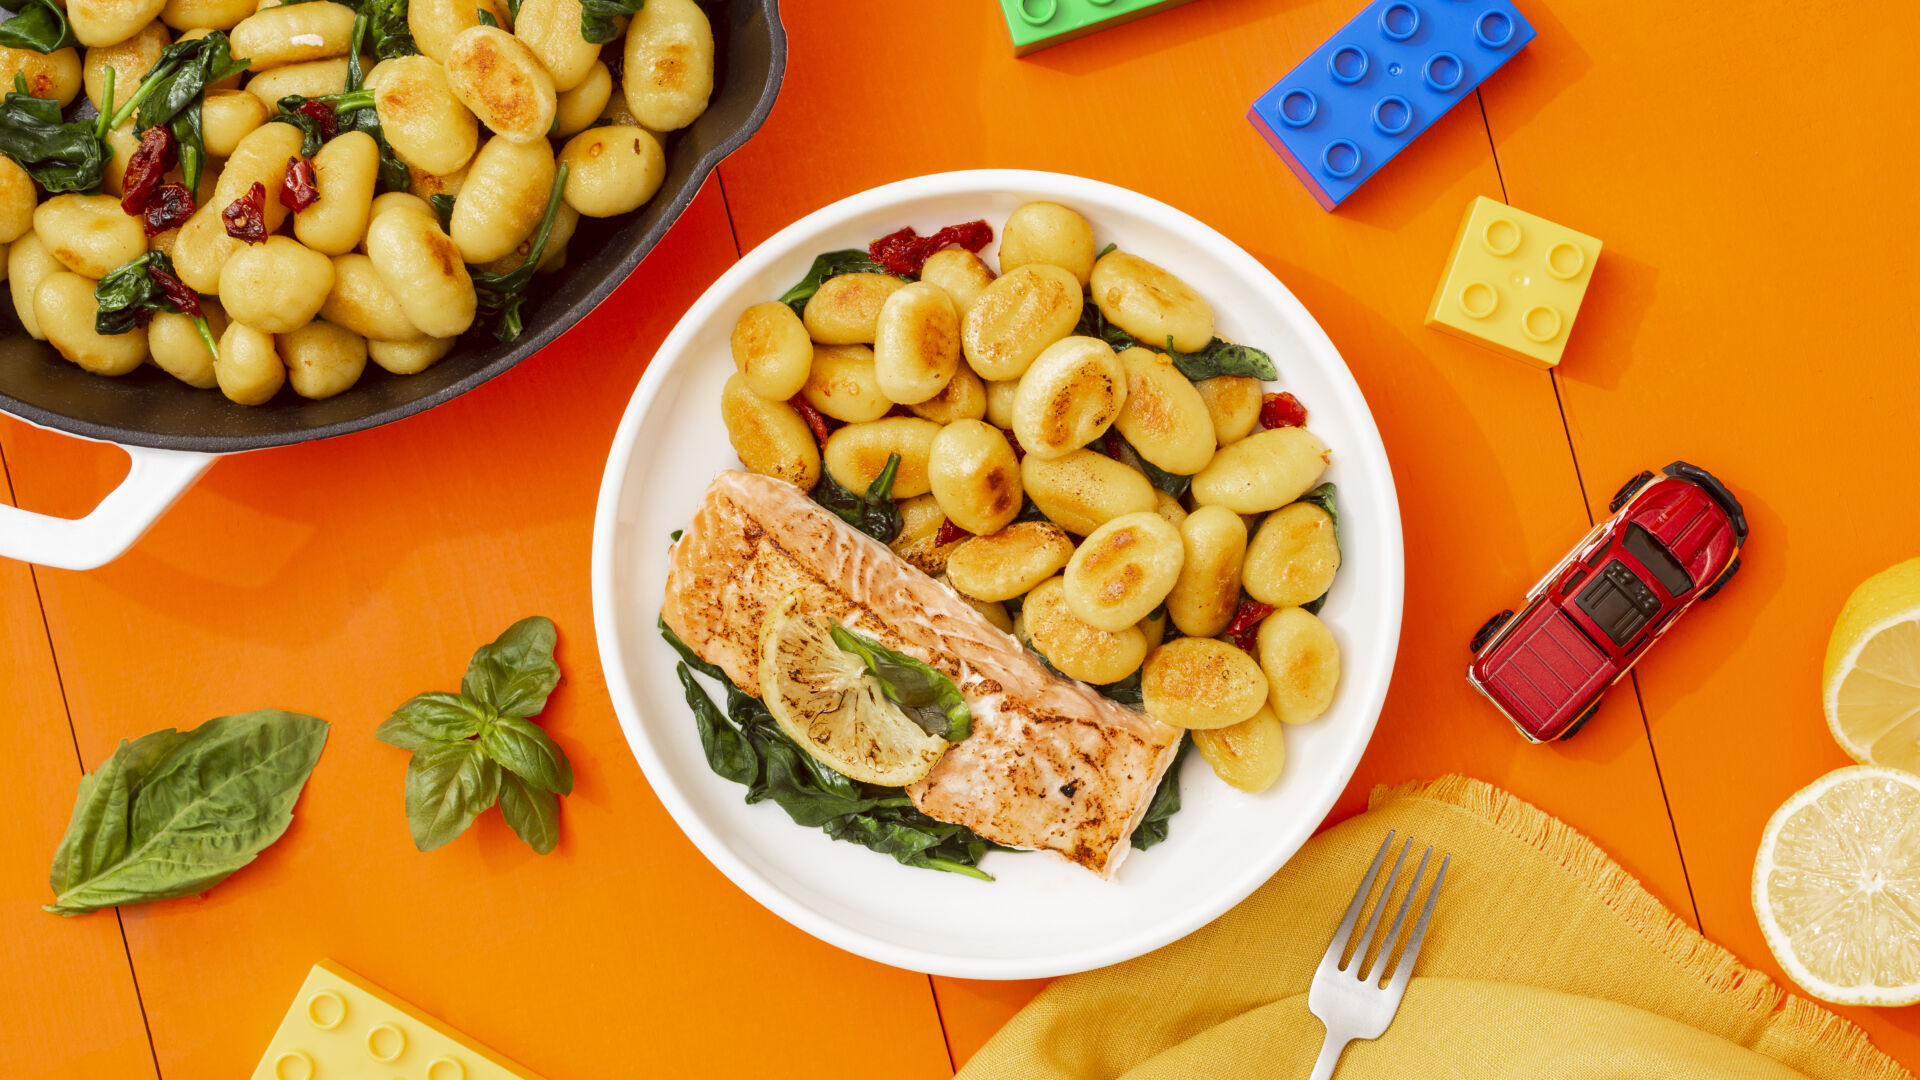 Baked Salmon and Skillet Gnocchi